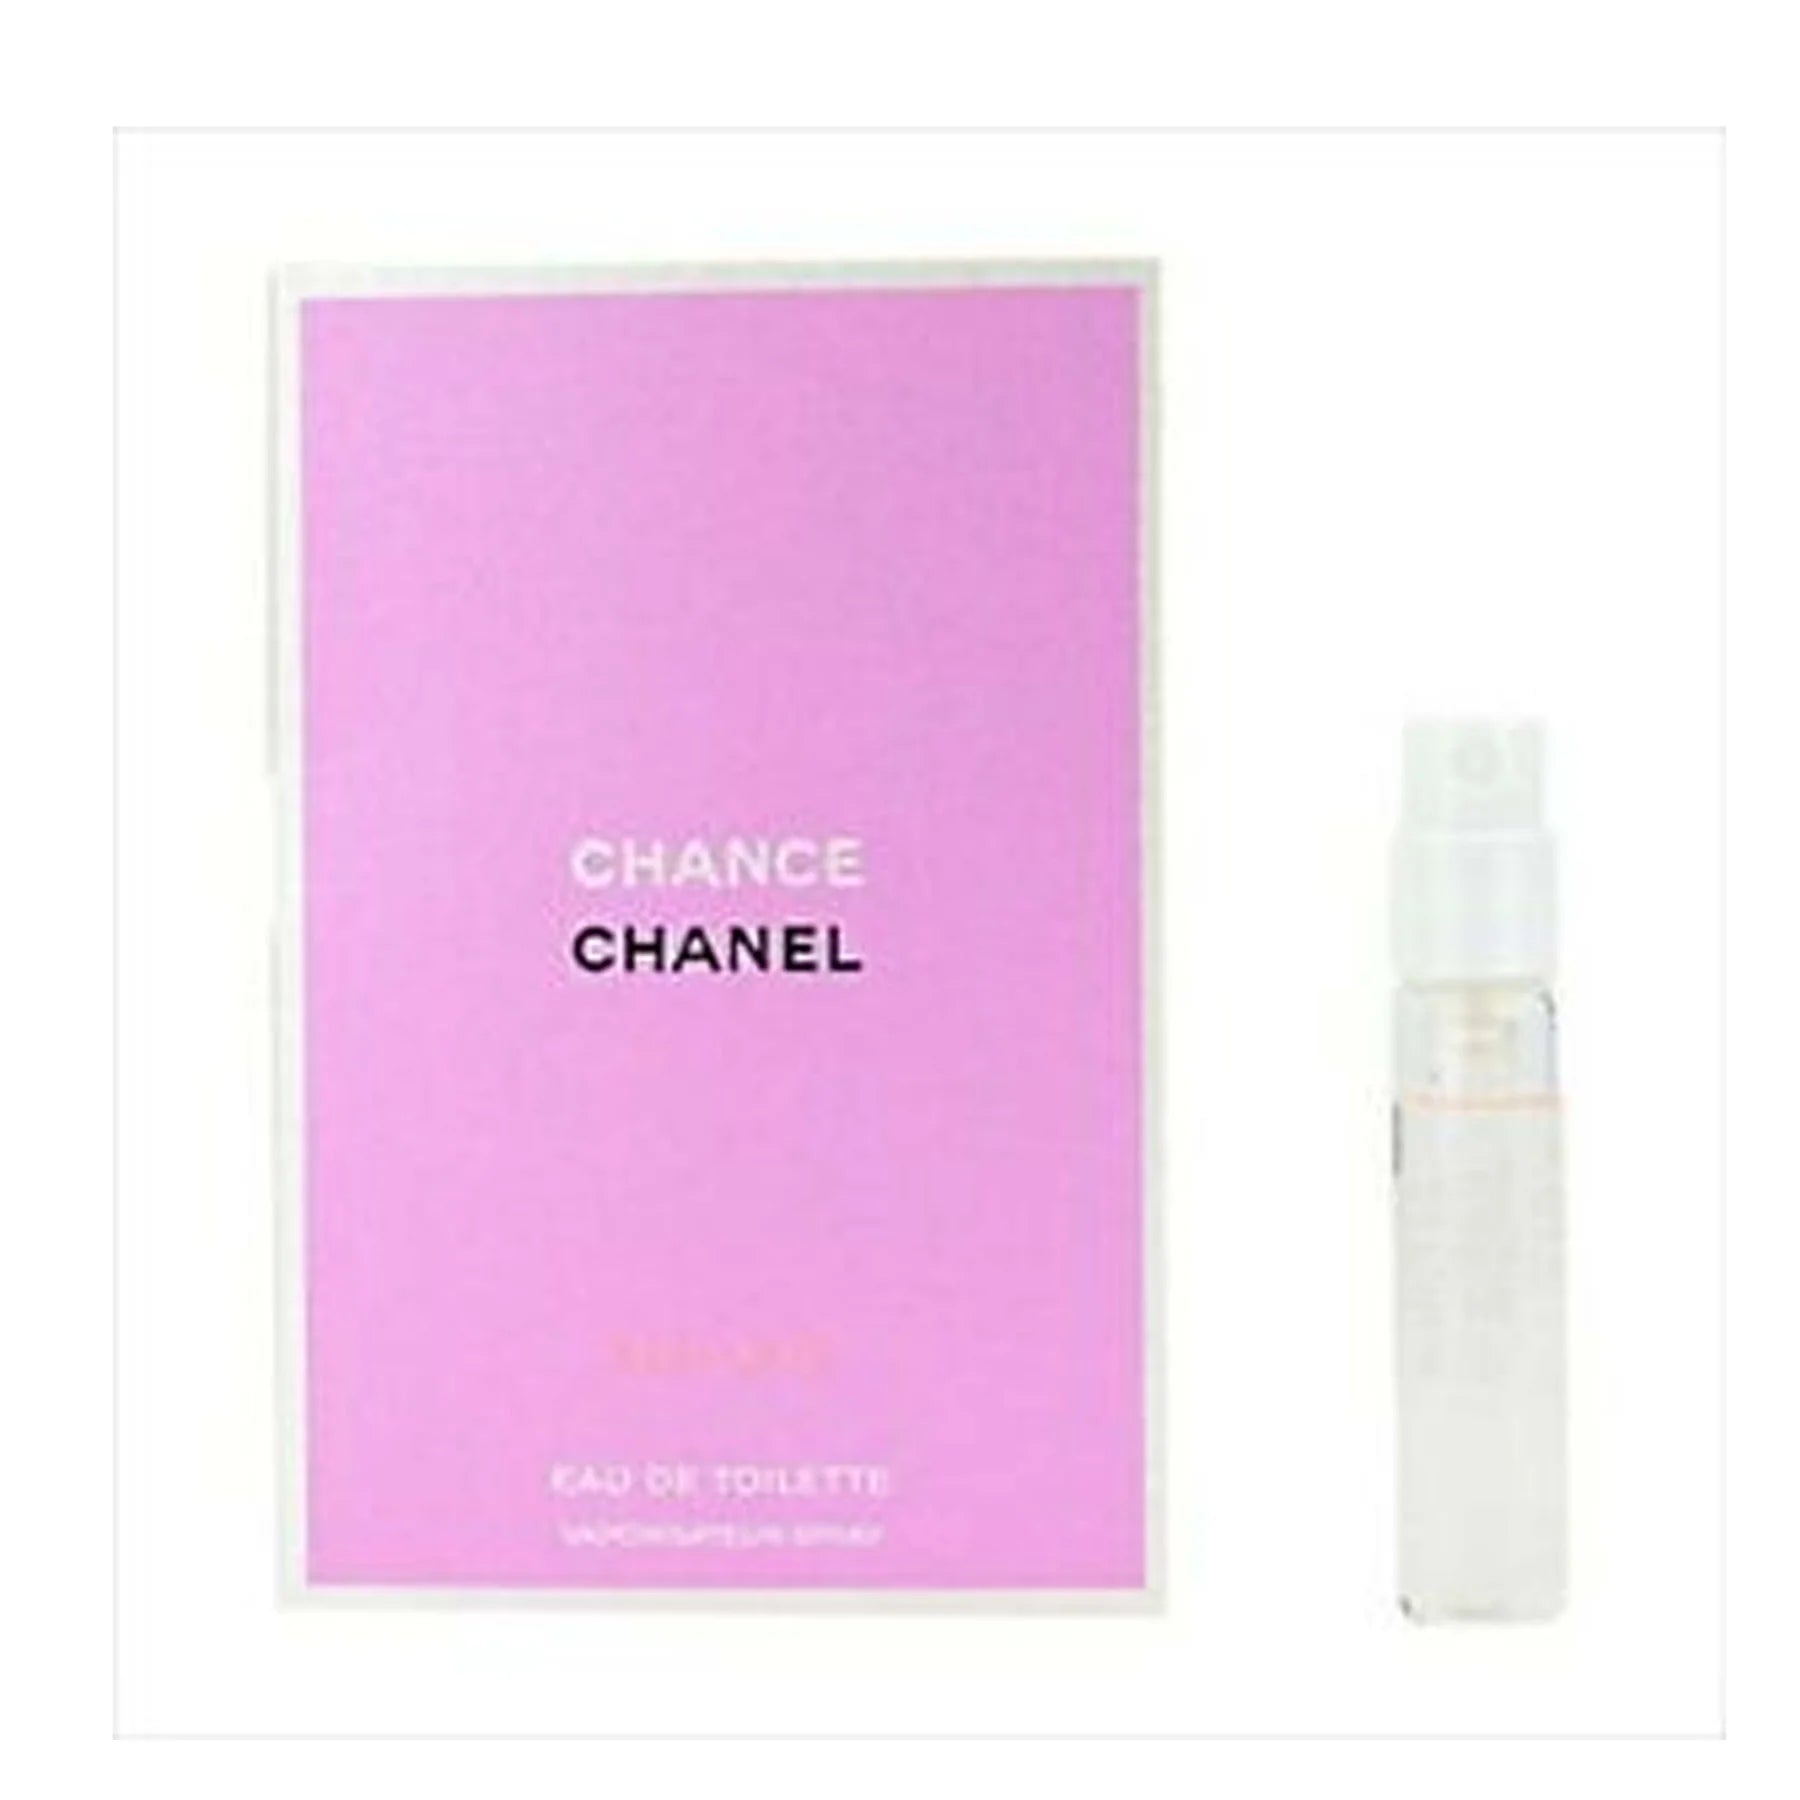 Dropship Chance Eau Vive By Chanel Eau De Toilette Spray to Sell Online at  a Lower Price